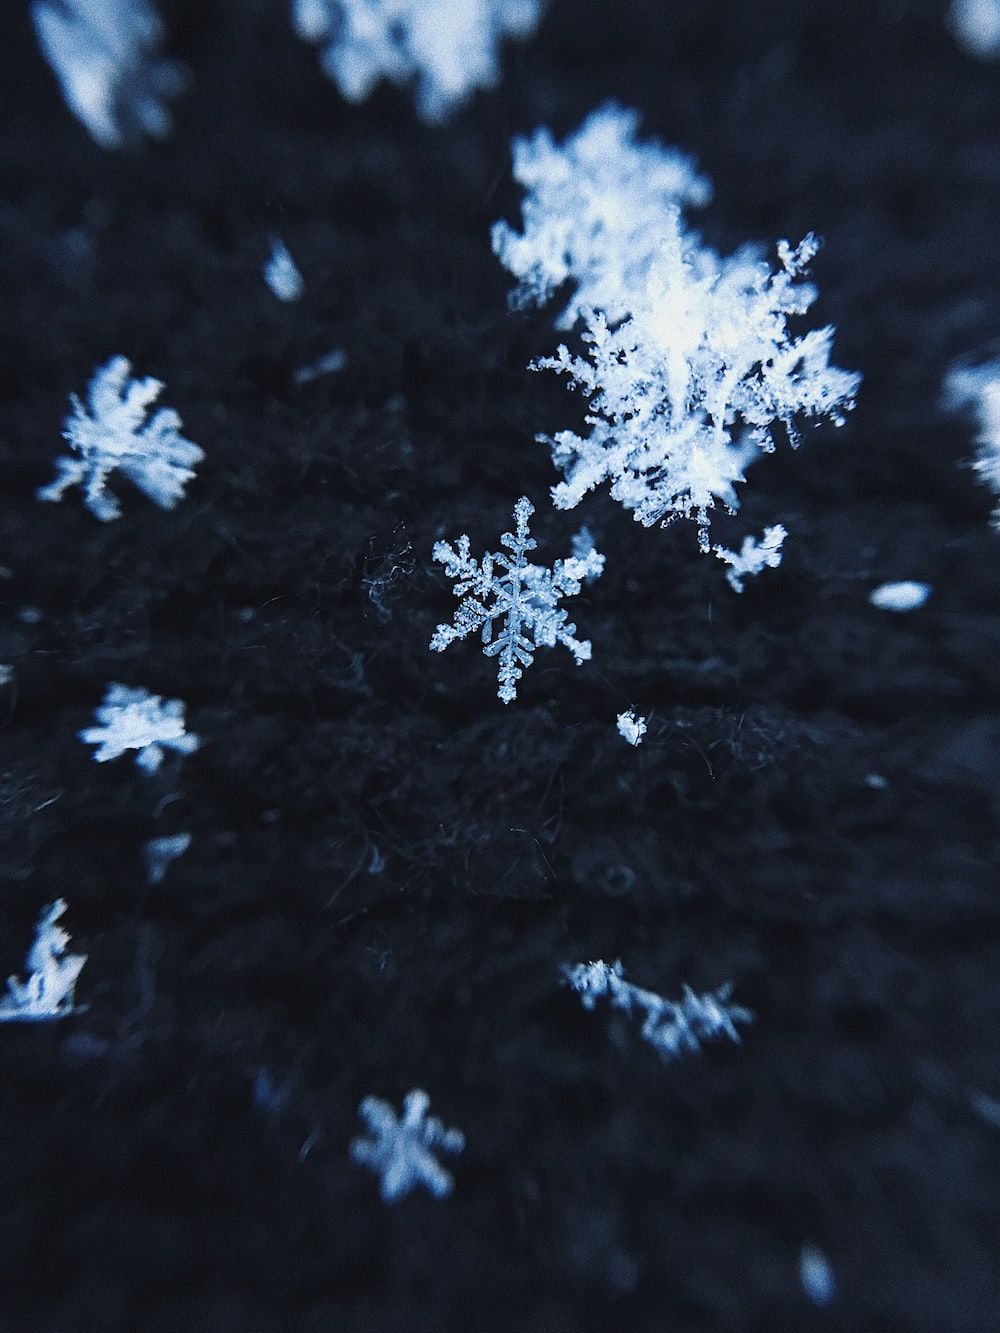 Snow Flake Picture. Download Free Image